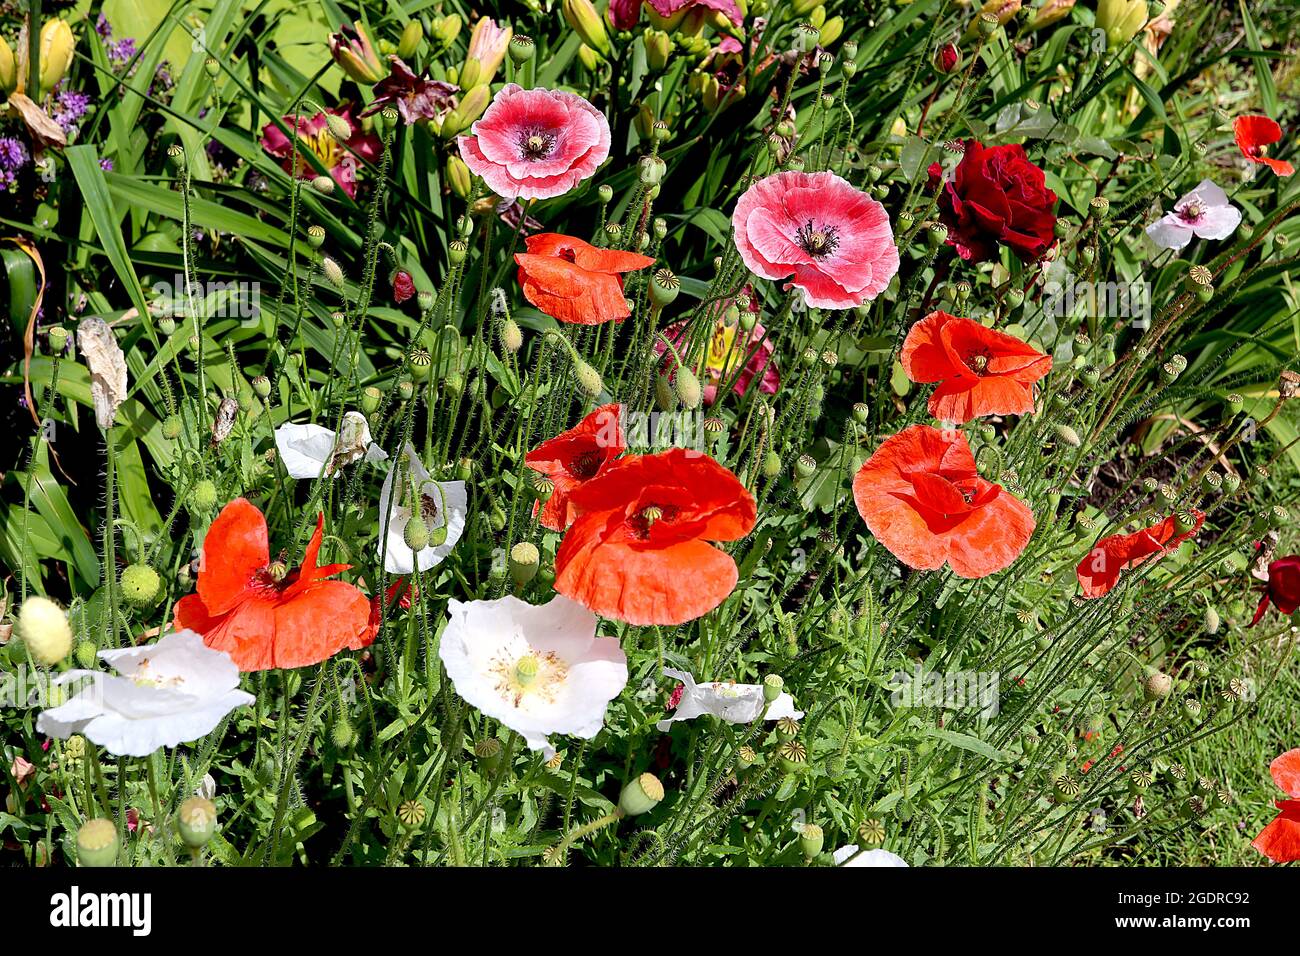 Papaver rhoeas Shirley Double Mixed corn poppy ‘Shirley Double Mixed’ – mixed red, white and mottled flowers with creased petals,  July, England, UK Stock Photo